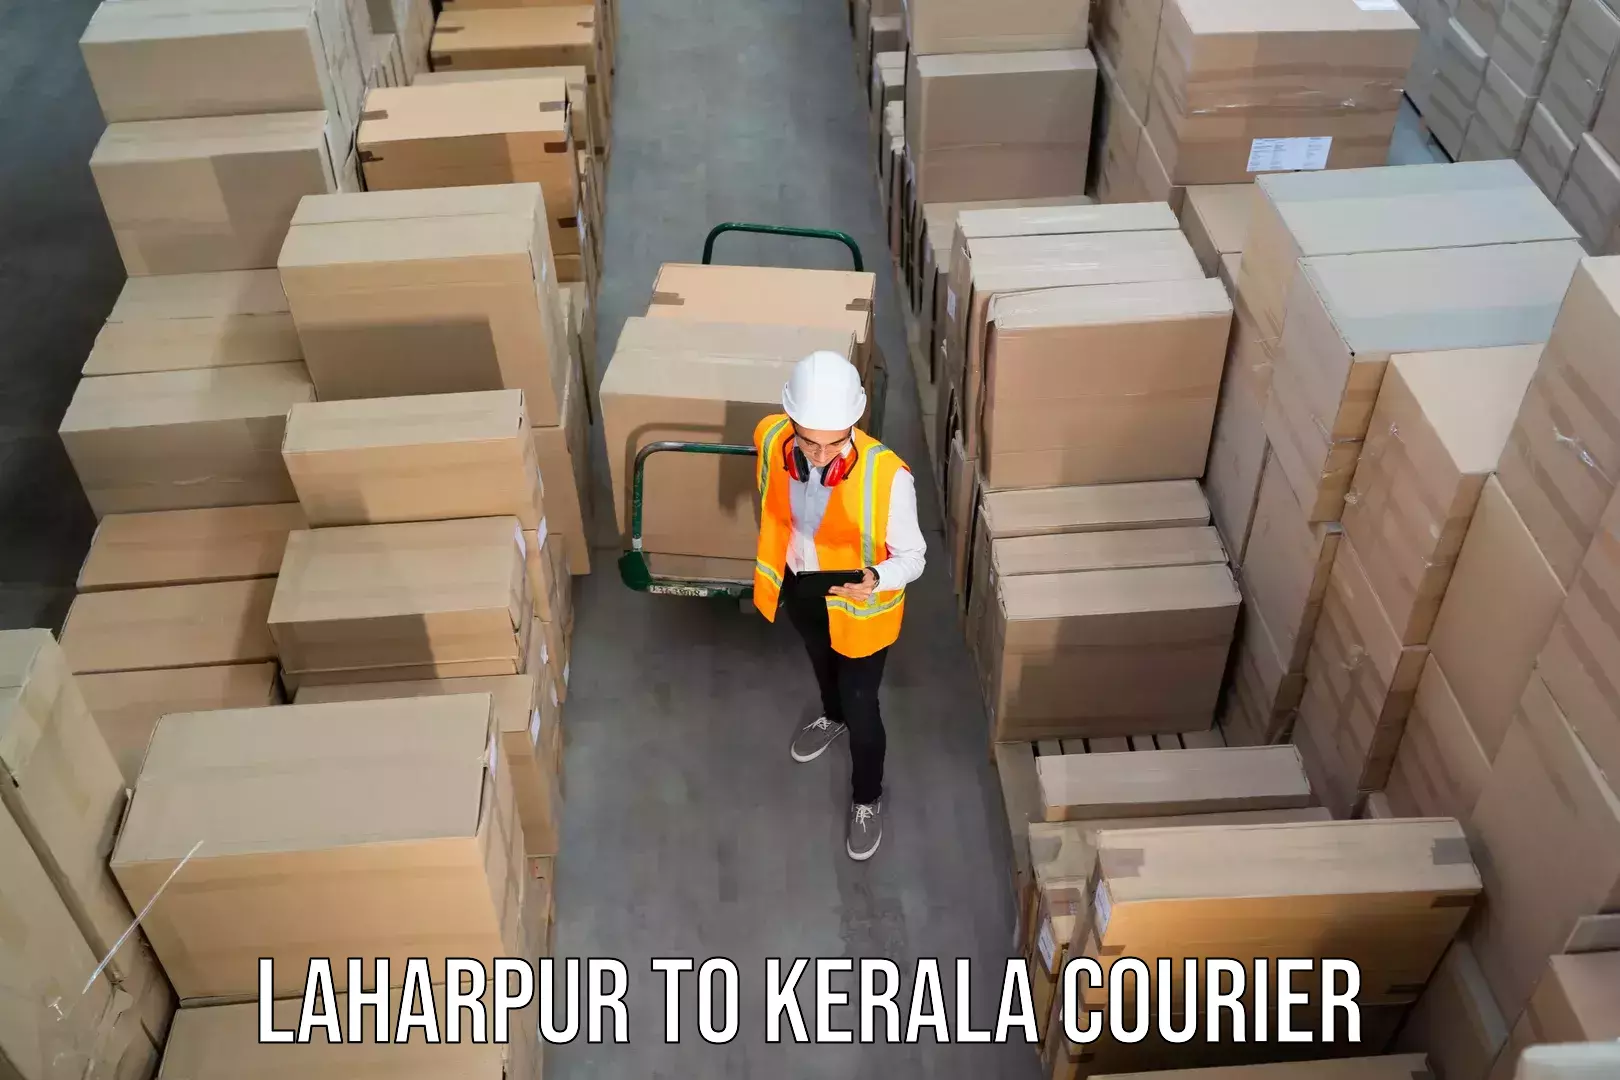 Professional courier services Laharpur to Cochin Port Kochi